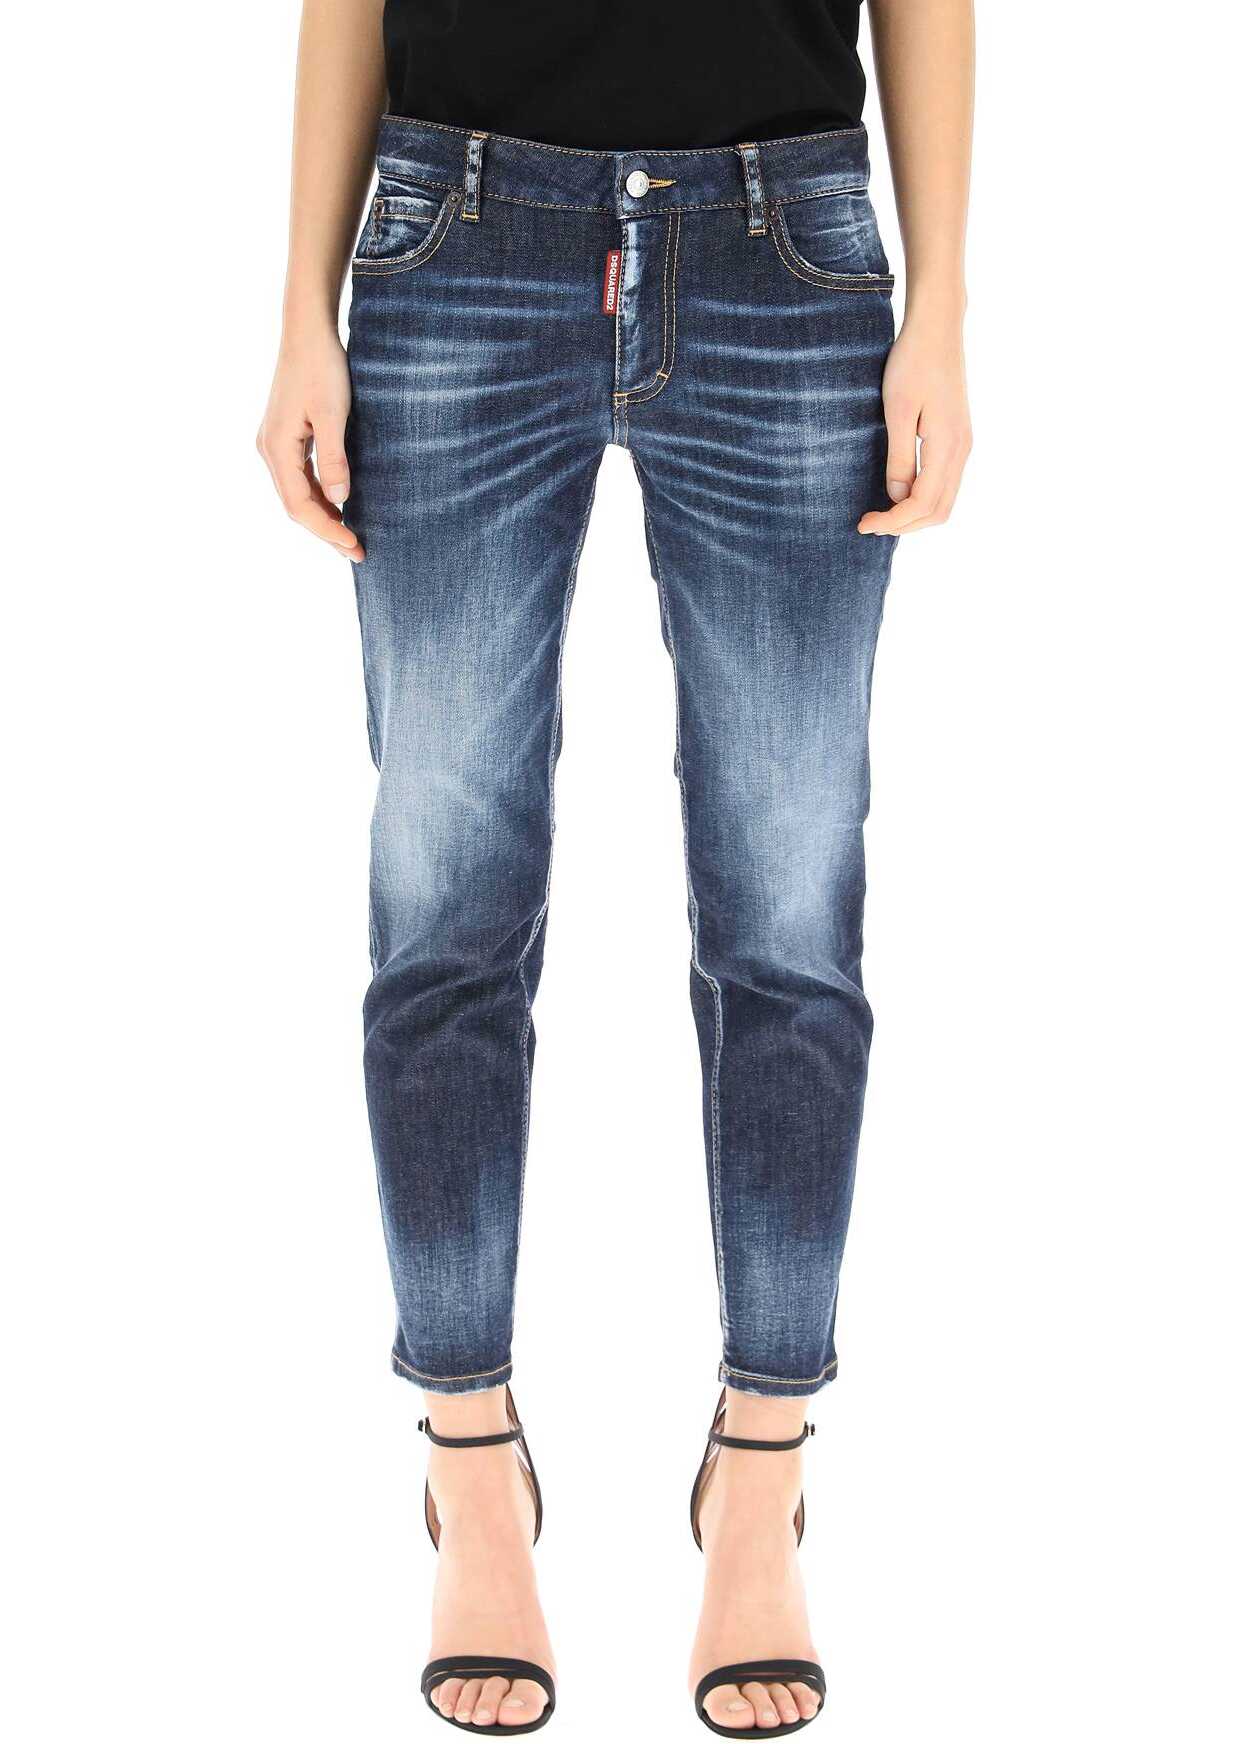 DSQUARED2 Twiggy Cropped Jeans S75LB0609 S30685 NAVY BLUE